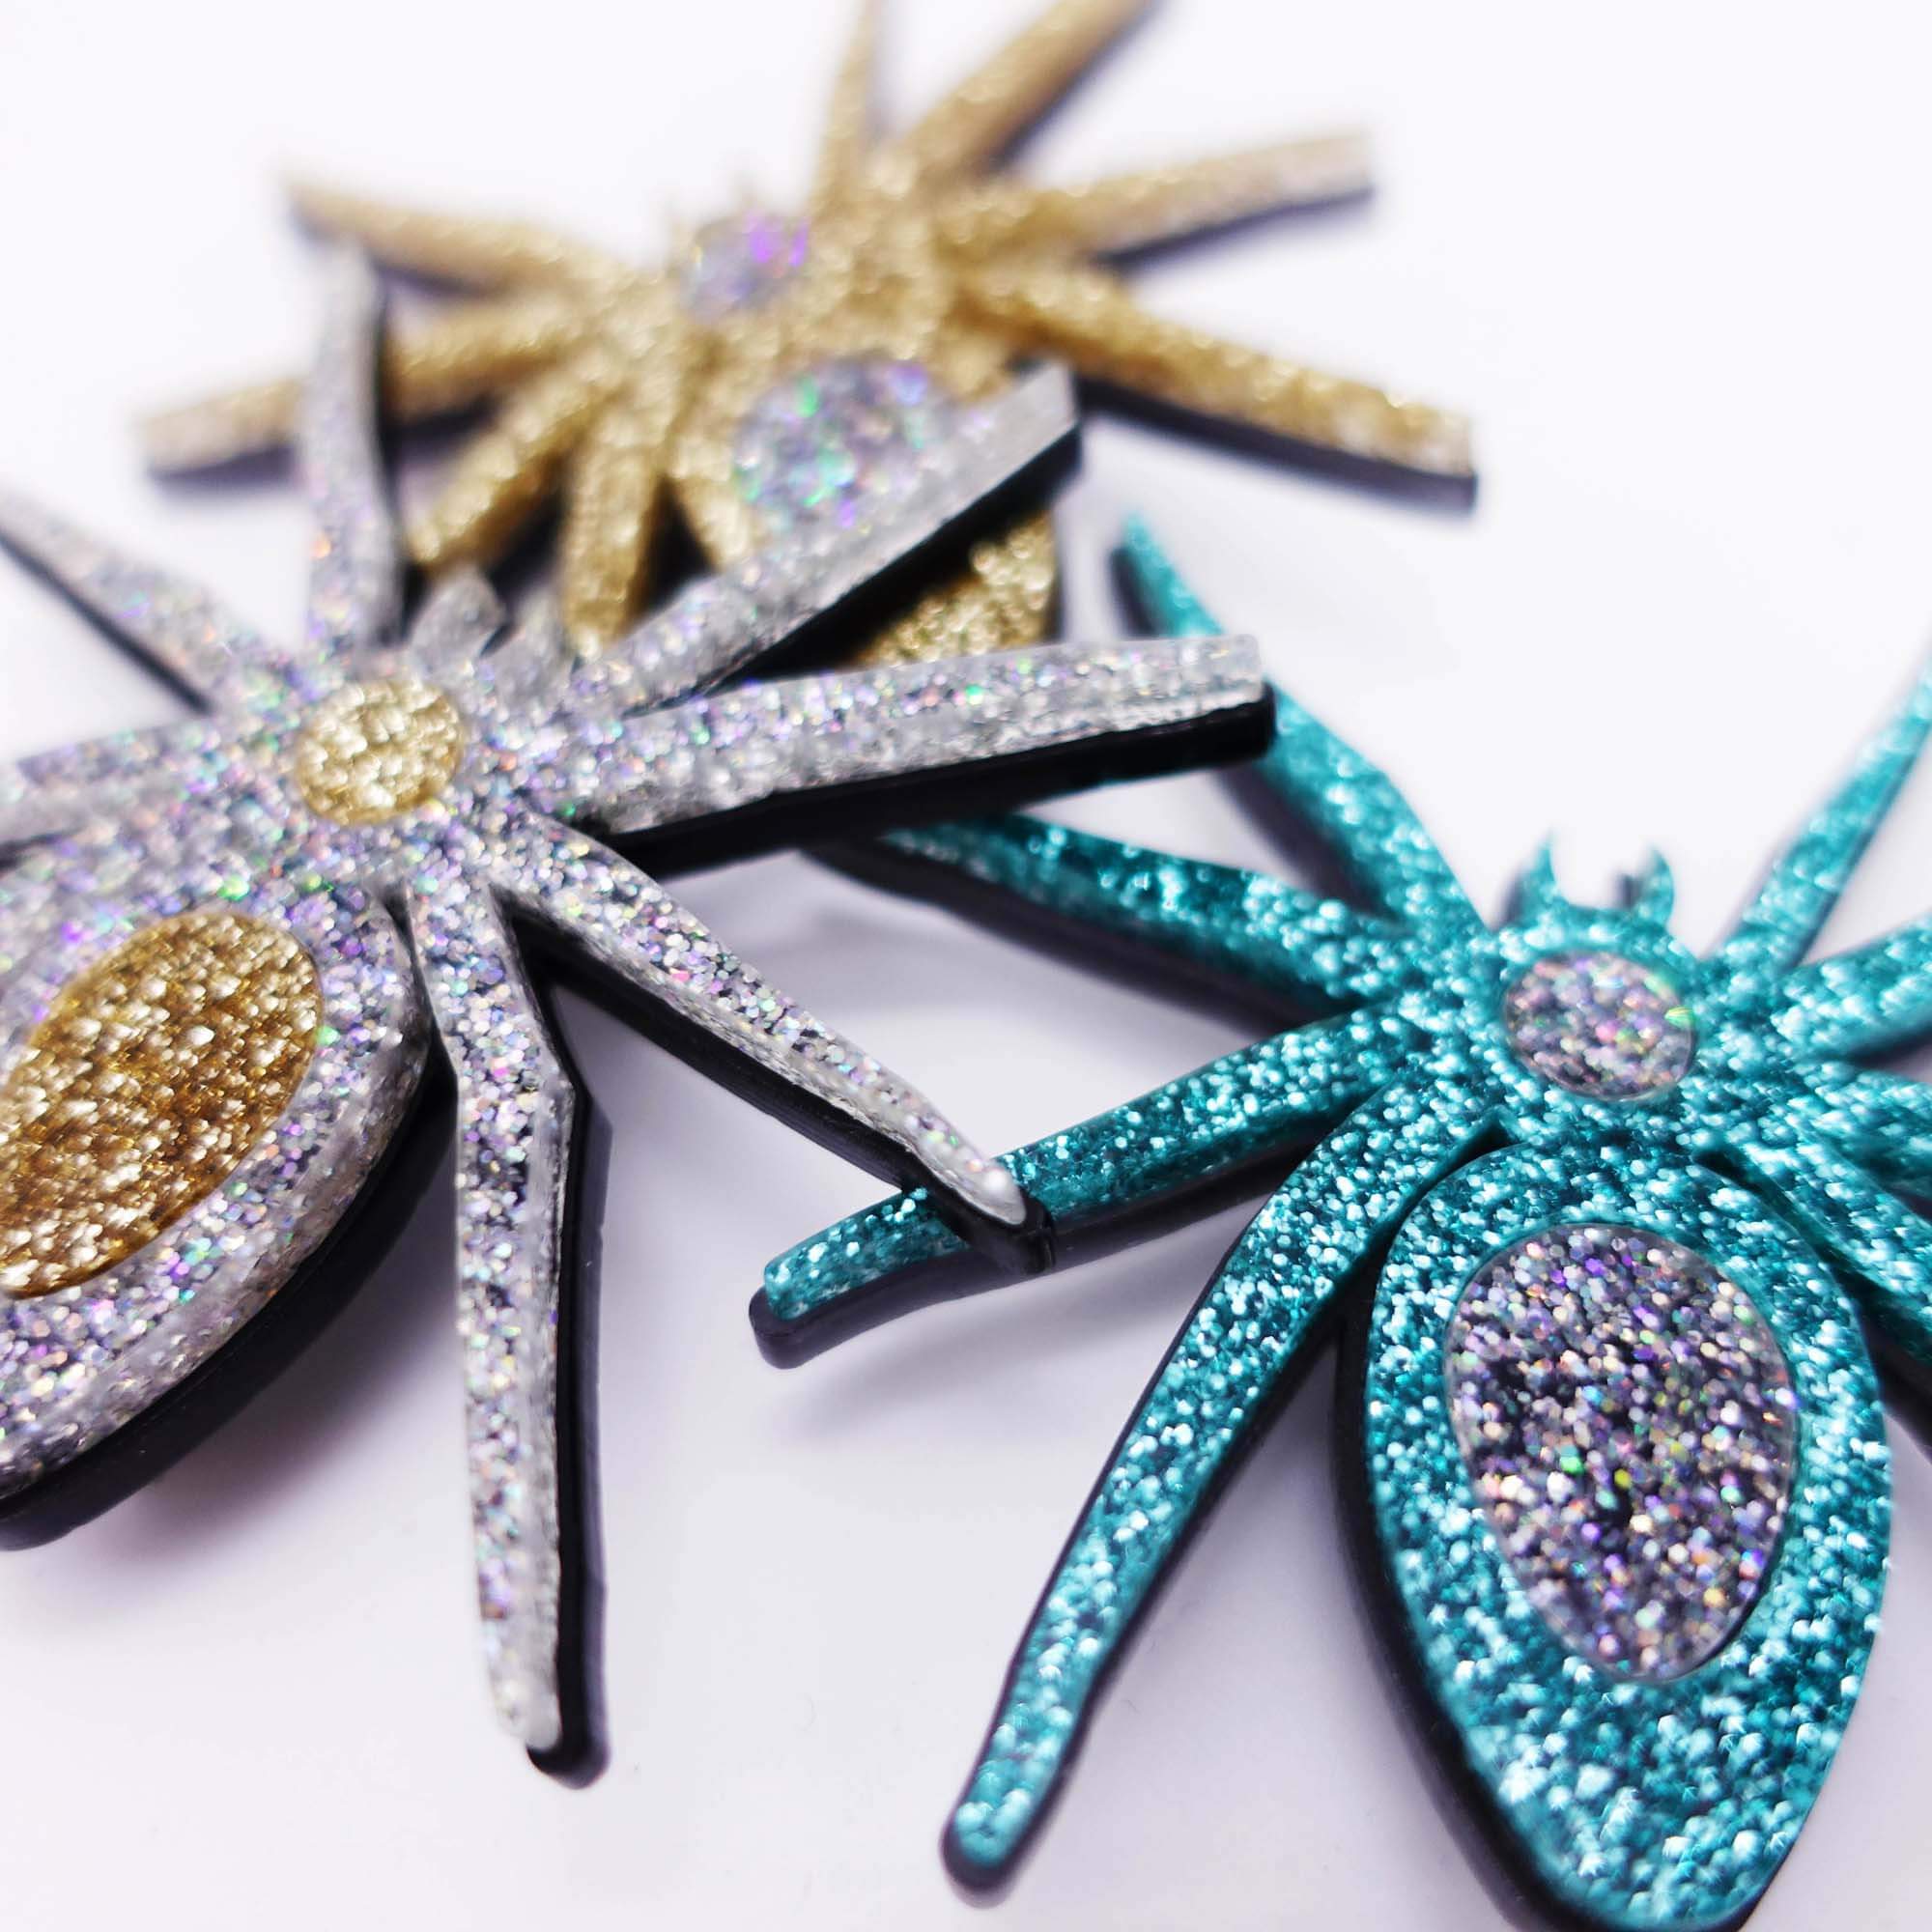 All Hail Lady Hale Spider Brooches designed by Sarah Day at Wear and Resist as a tribute to Lady Hale's spider brooch. £2 from each goes to Women for Refugee Women.